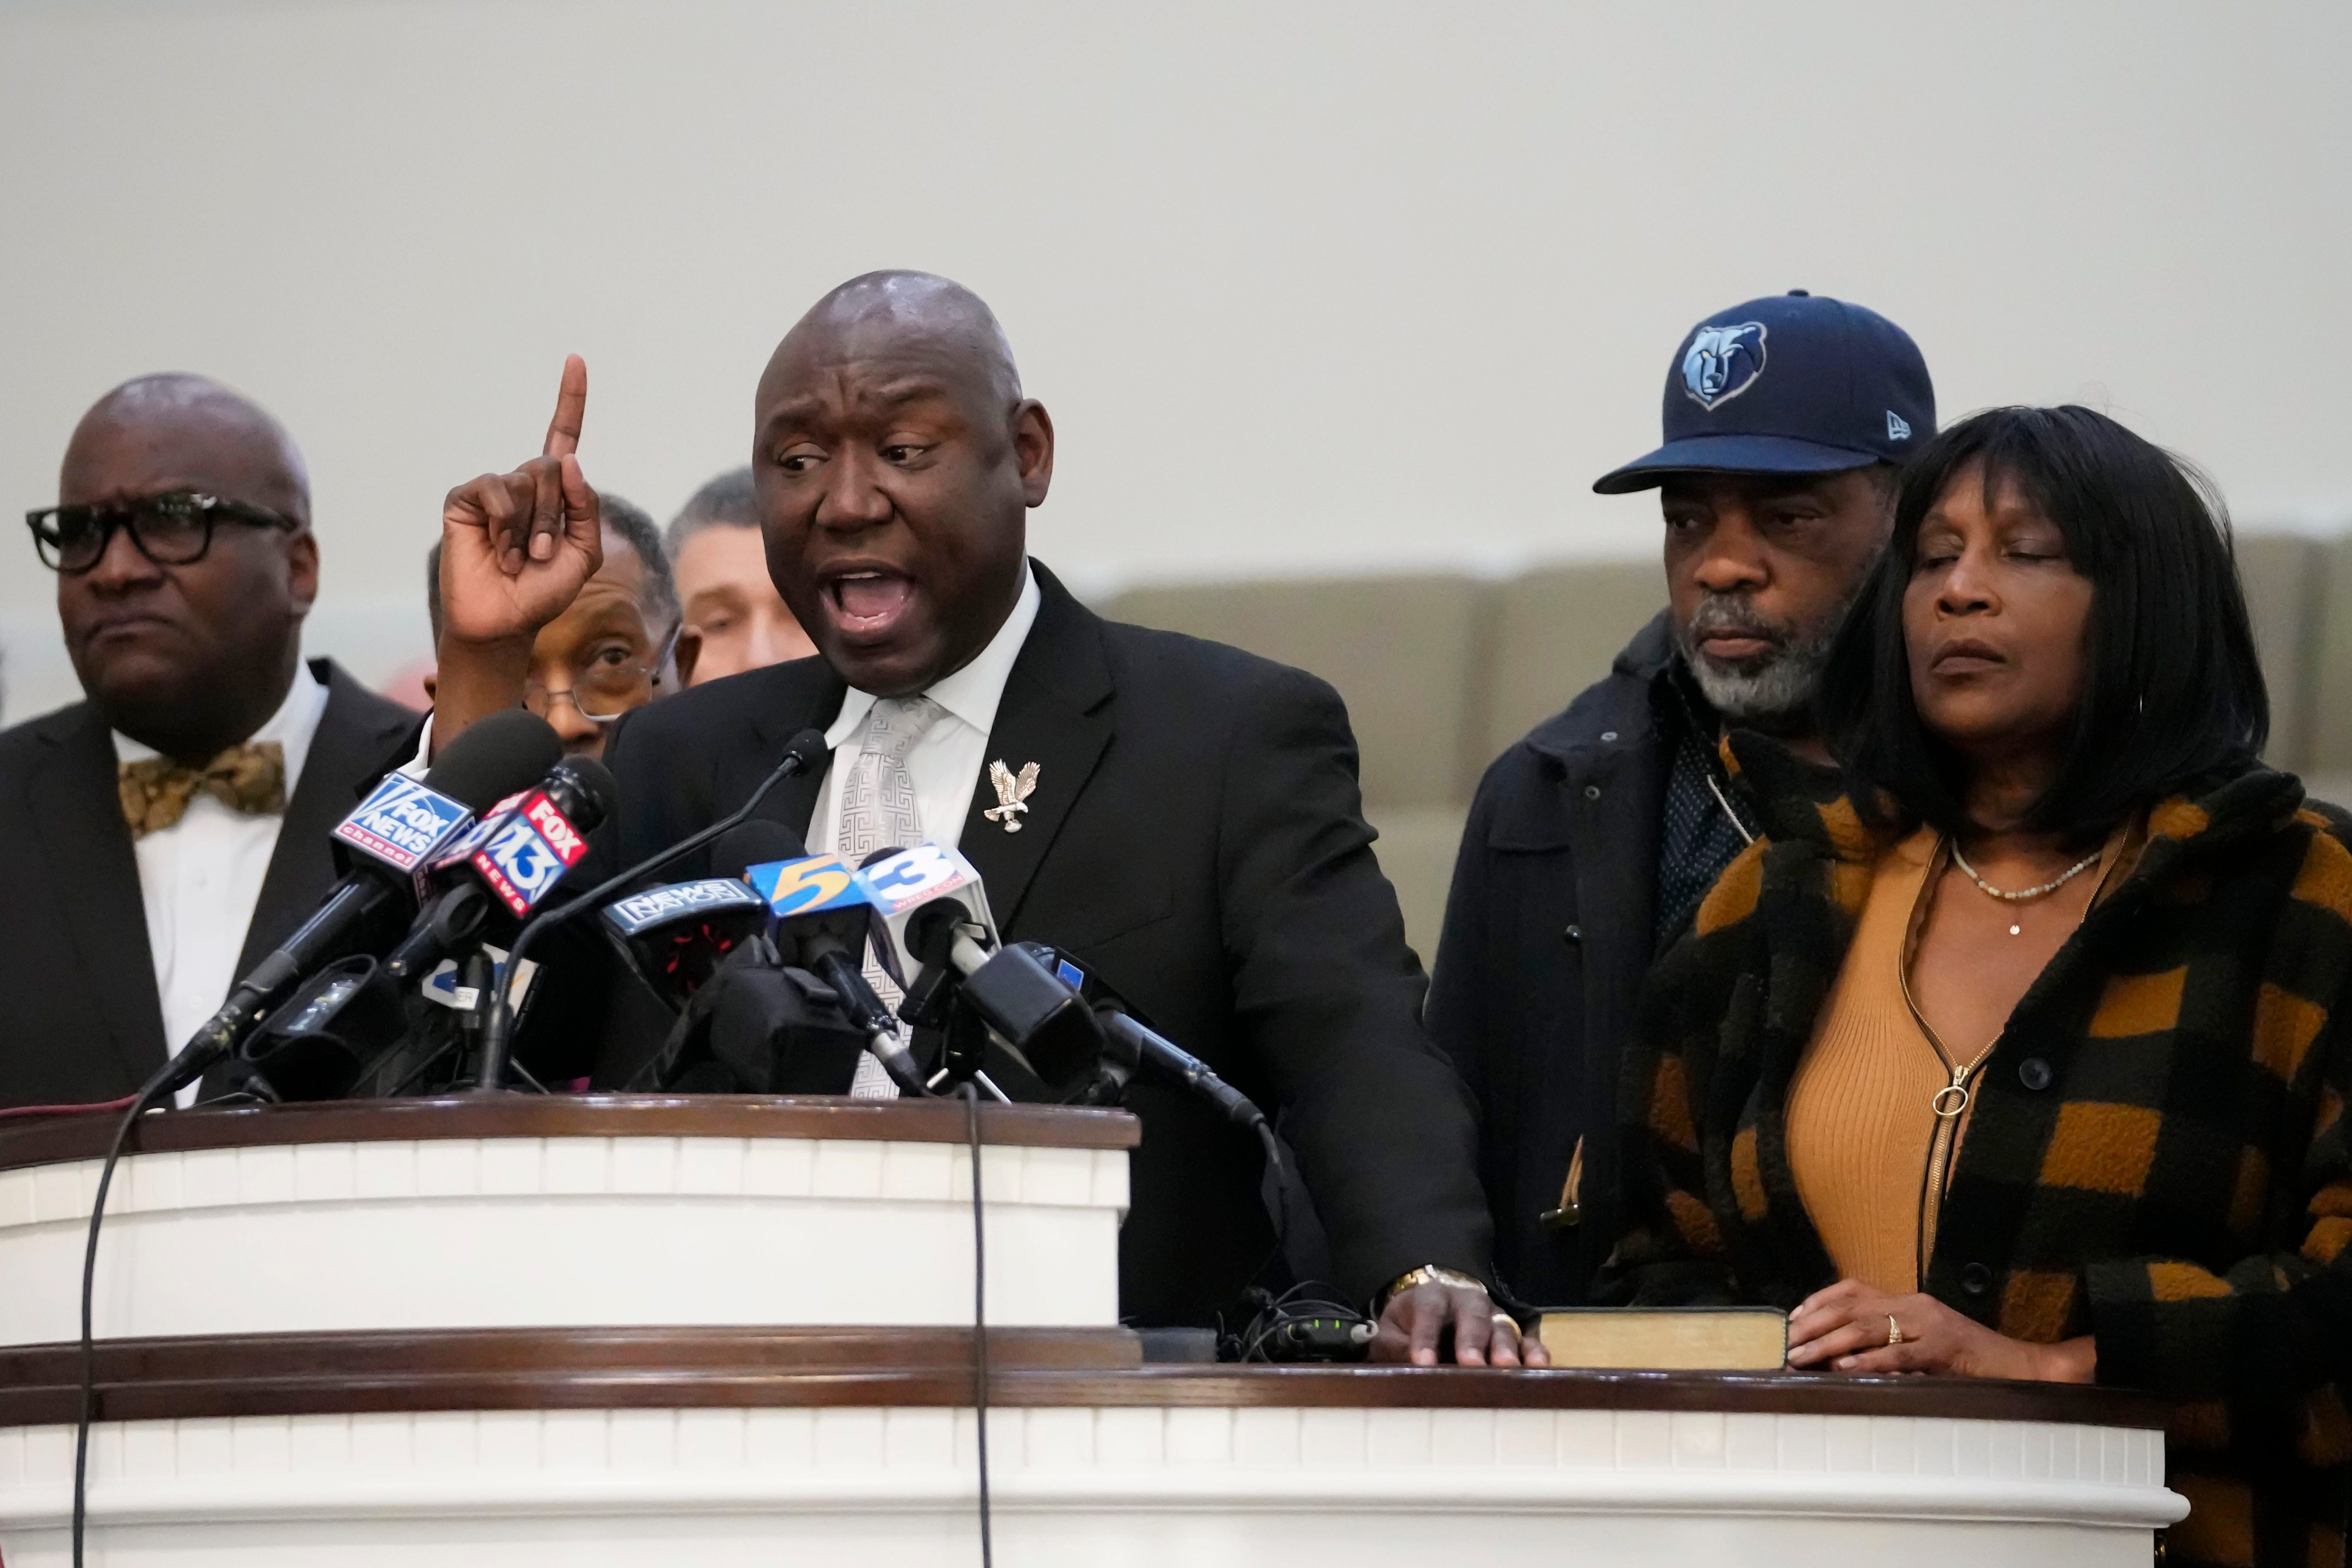 Ben Crump applauded 'swift justice' in Tyre Nichols killing. Experts say the speed was 'unusual.'